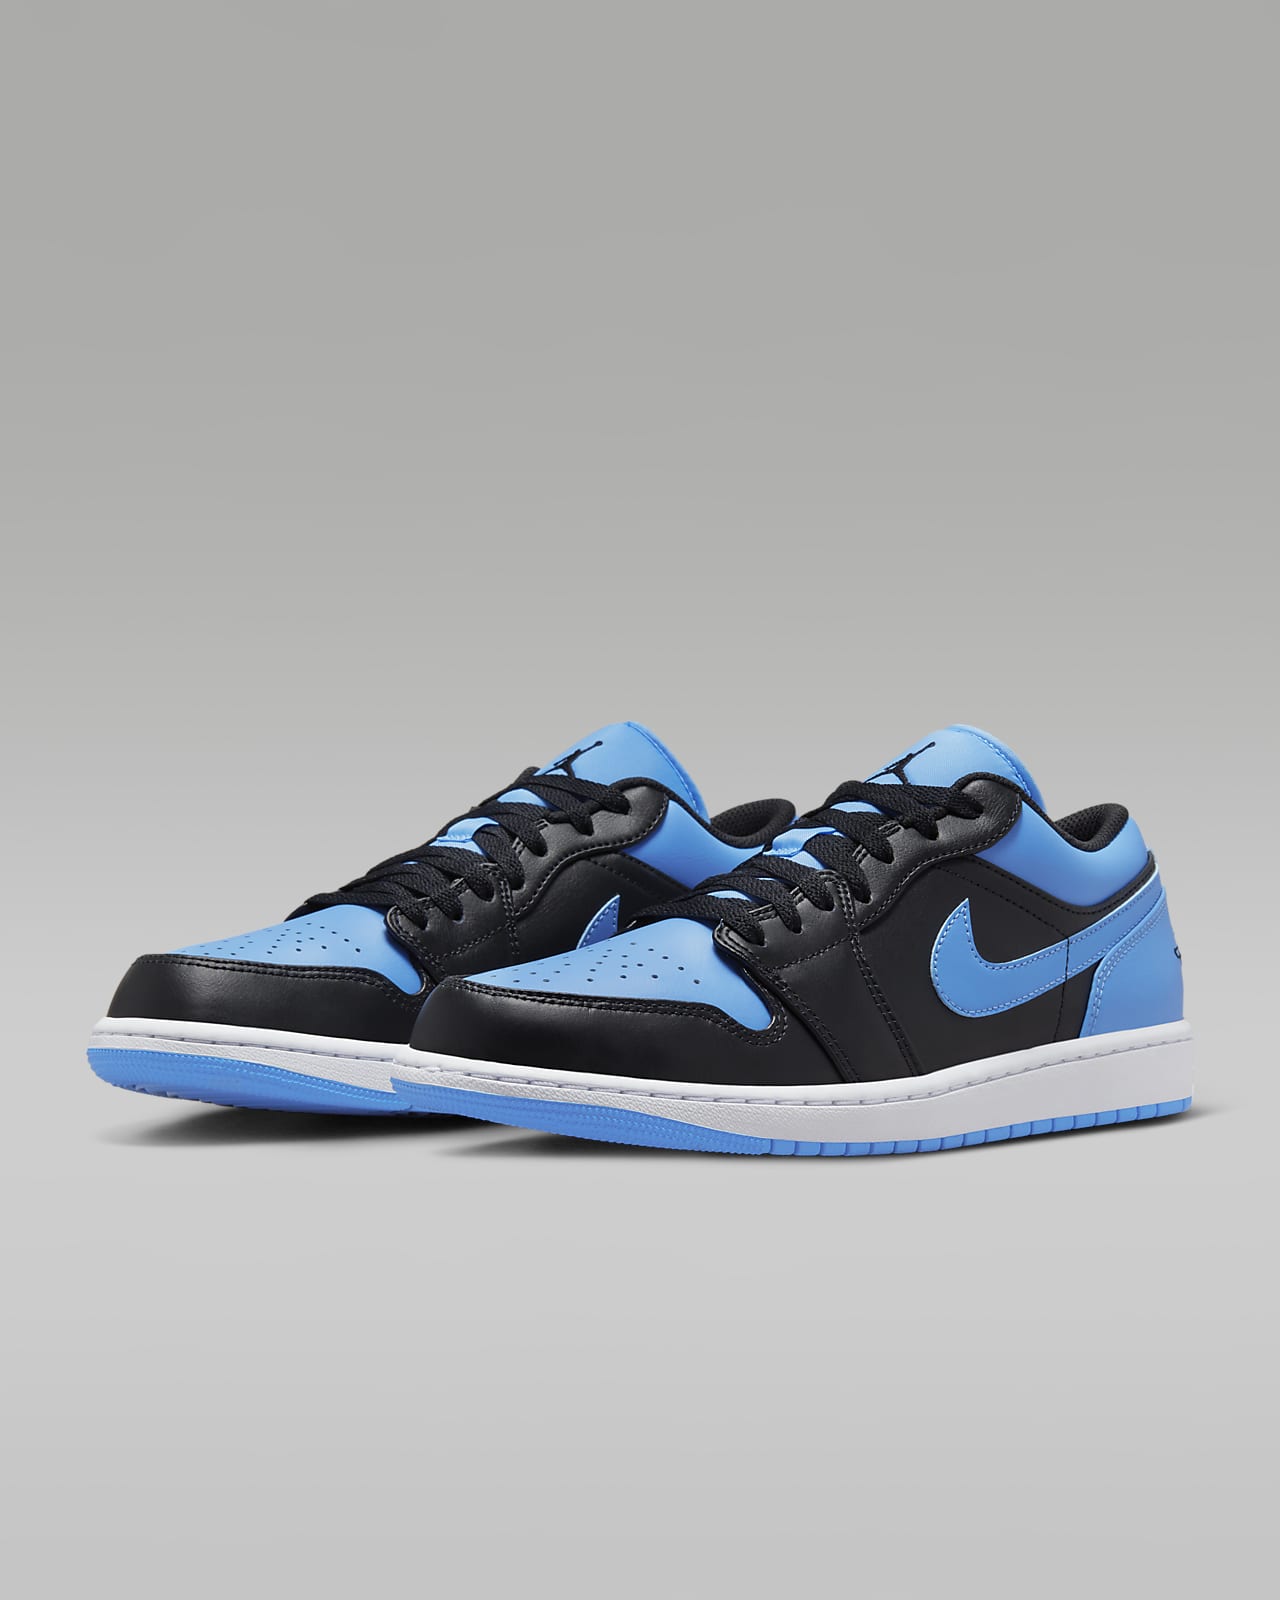 Buy Air Jordan 1 Products Online at Best Prices in India